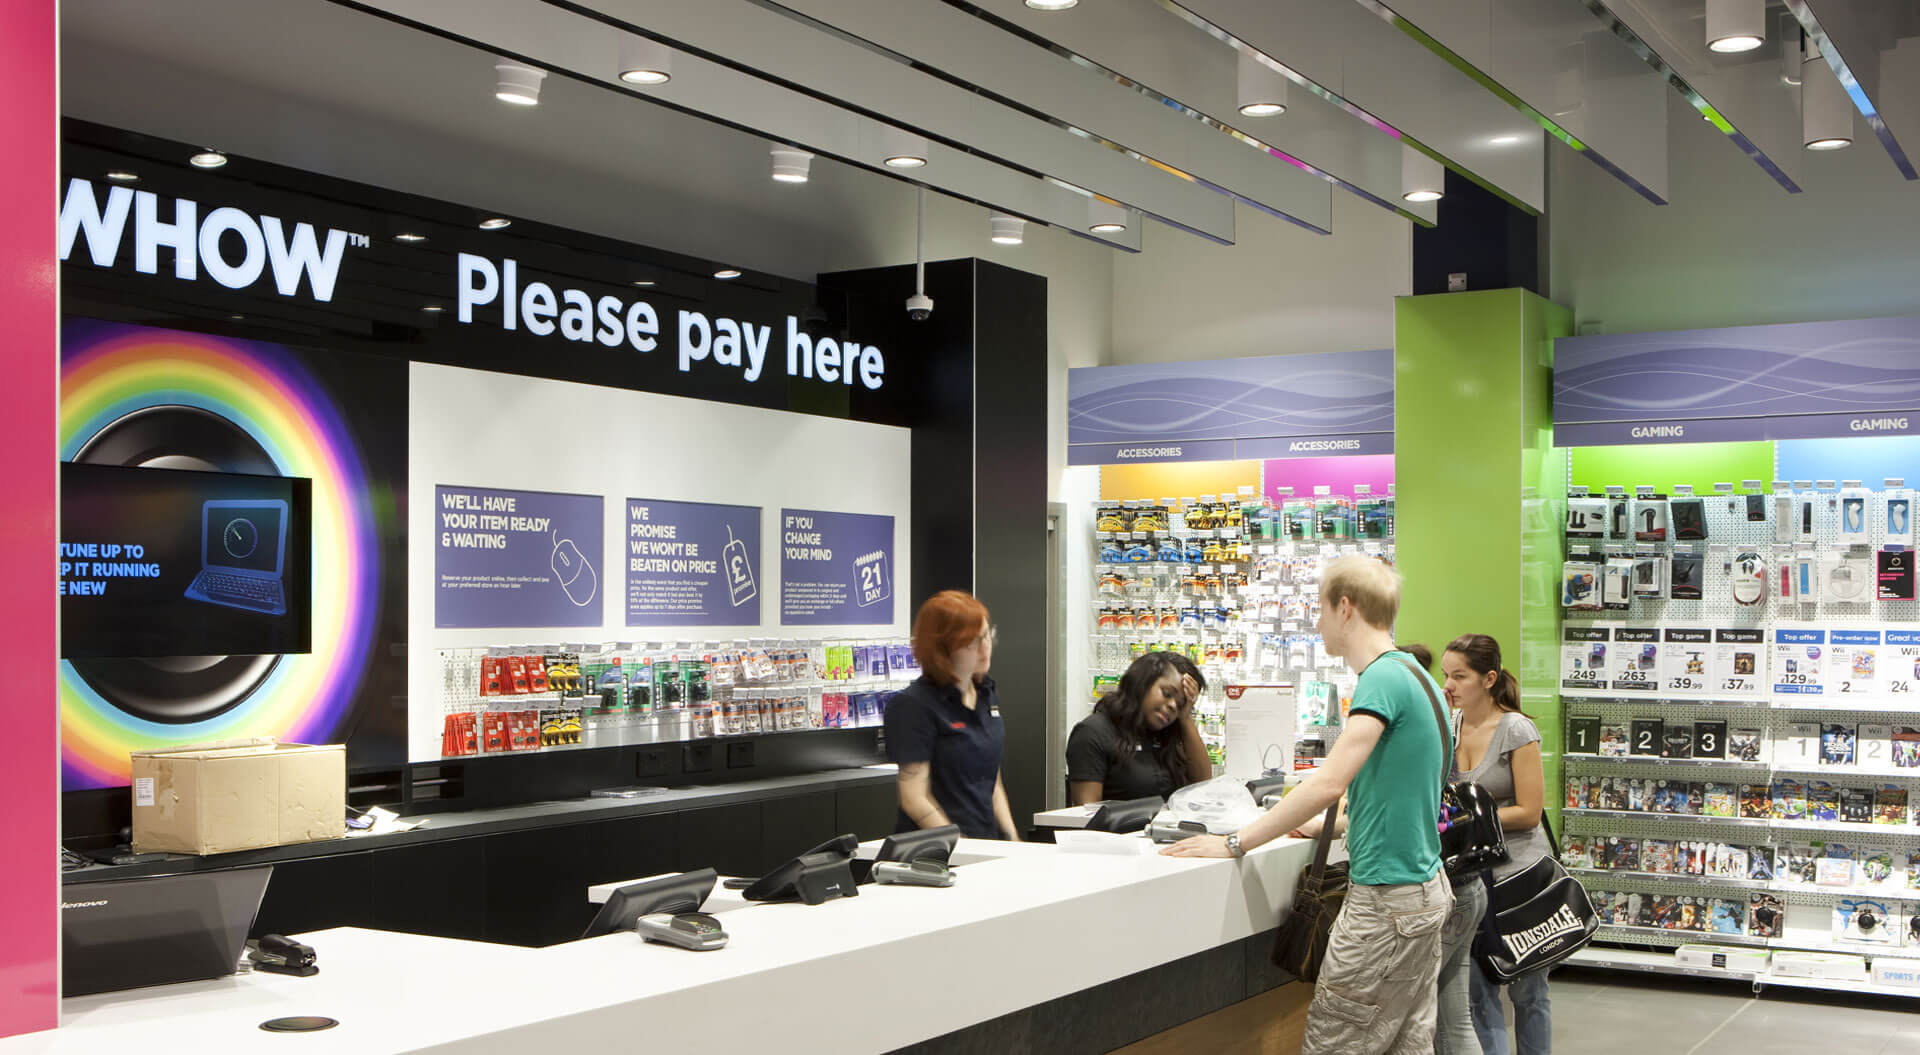 Currys PC World point of sale communications at pay point